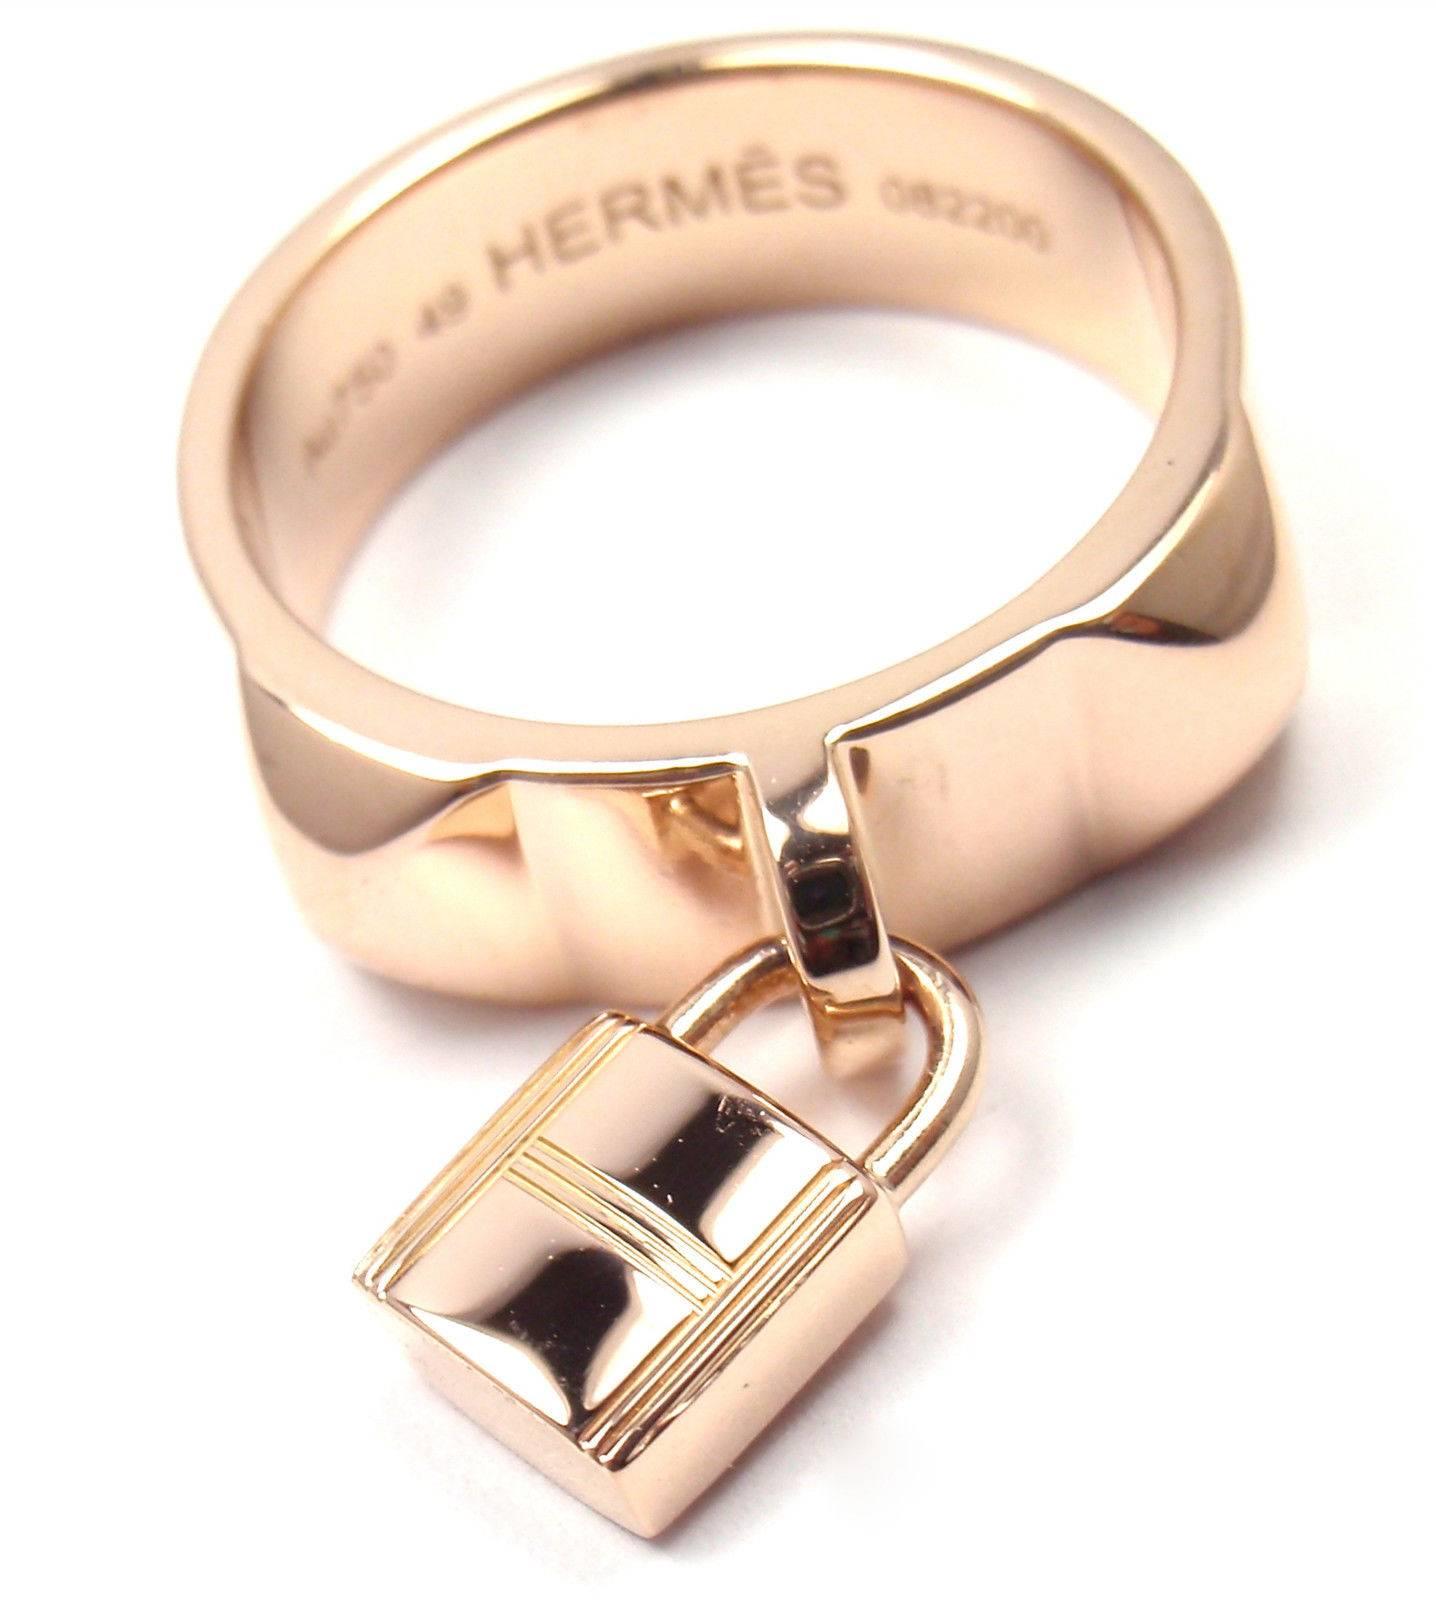 18k Rose Gold Collier De Chien Lock Band Ring by Hermes. 
Details: 
Size: European 49, US 4 3/4
Weight: 8.4 grams
Width:  6mm
Stamped Hallmarks: HERMES 750 49 082200
*Free Shipping within the United States*
YOUR PRICE: $2,000
T1487mdhd